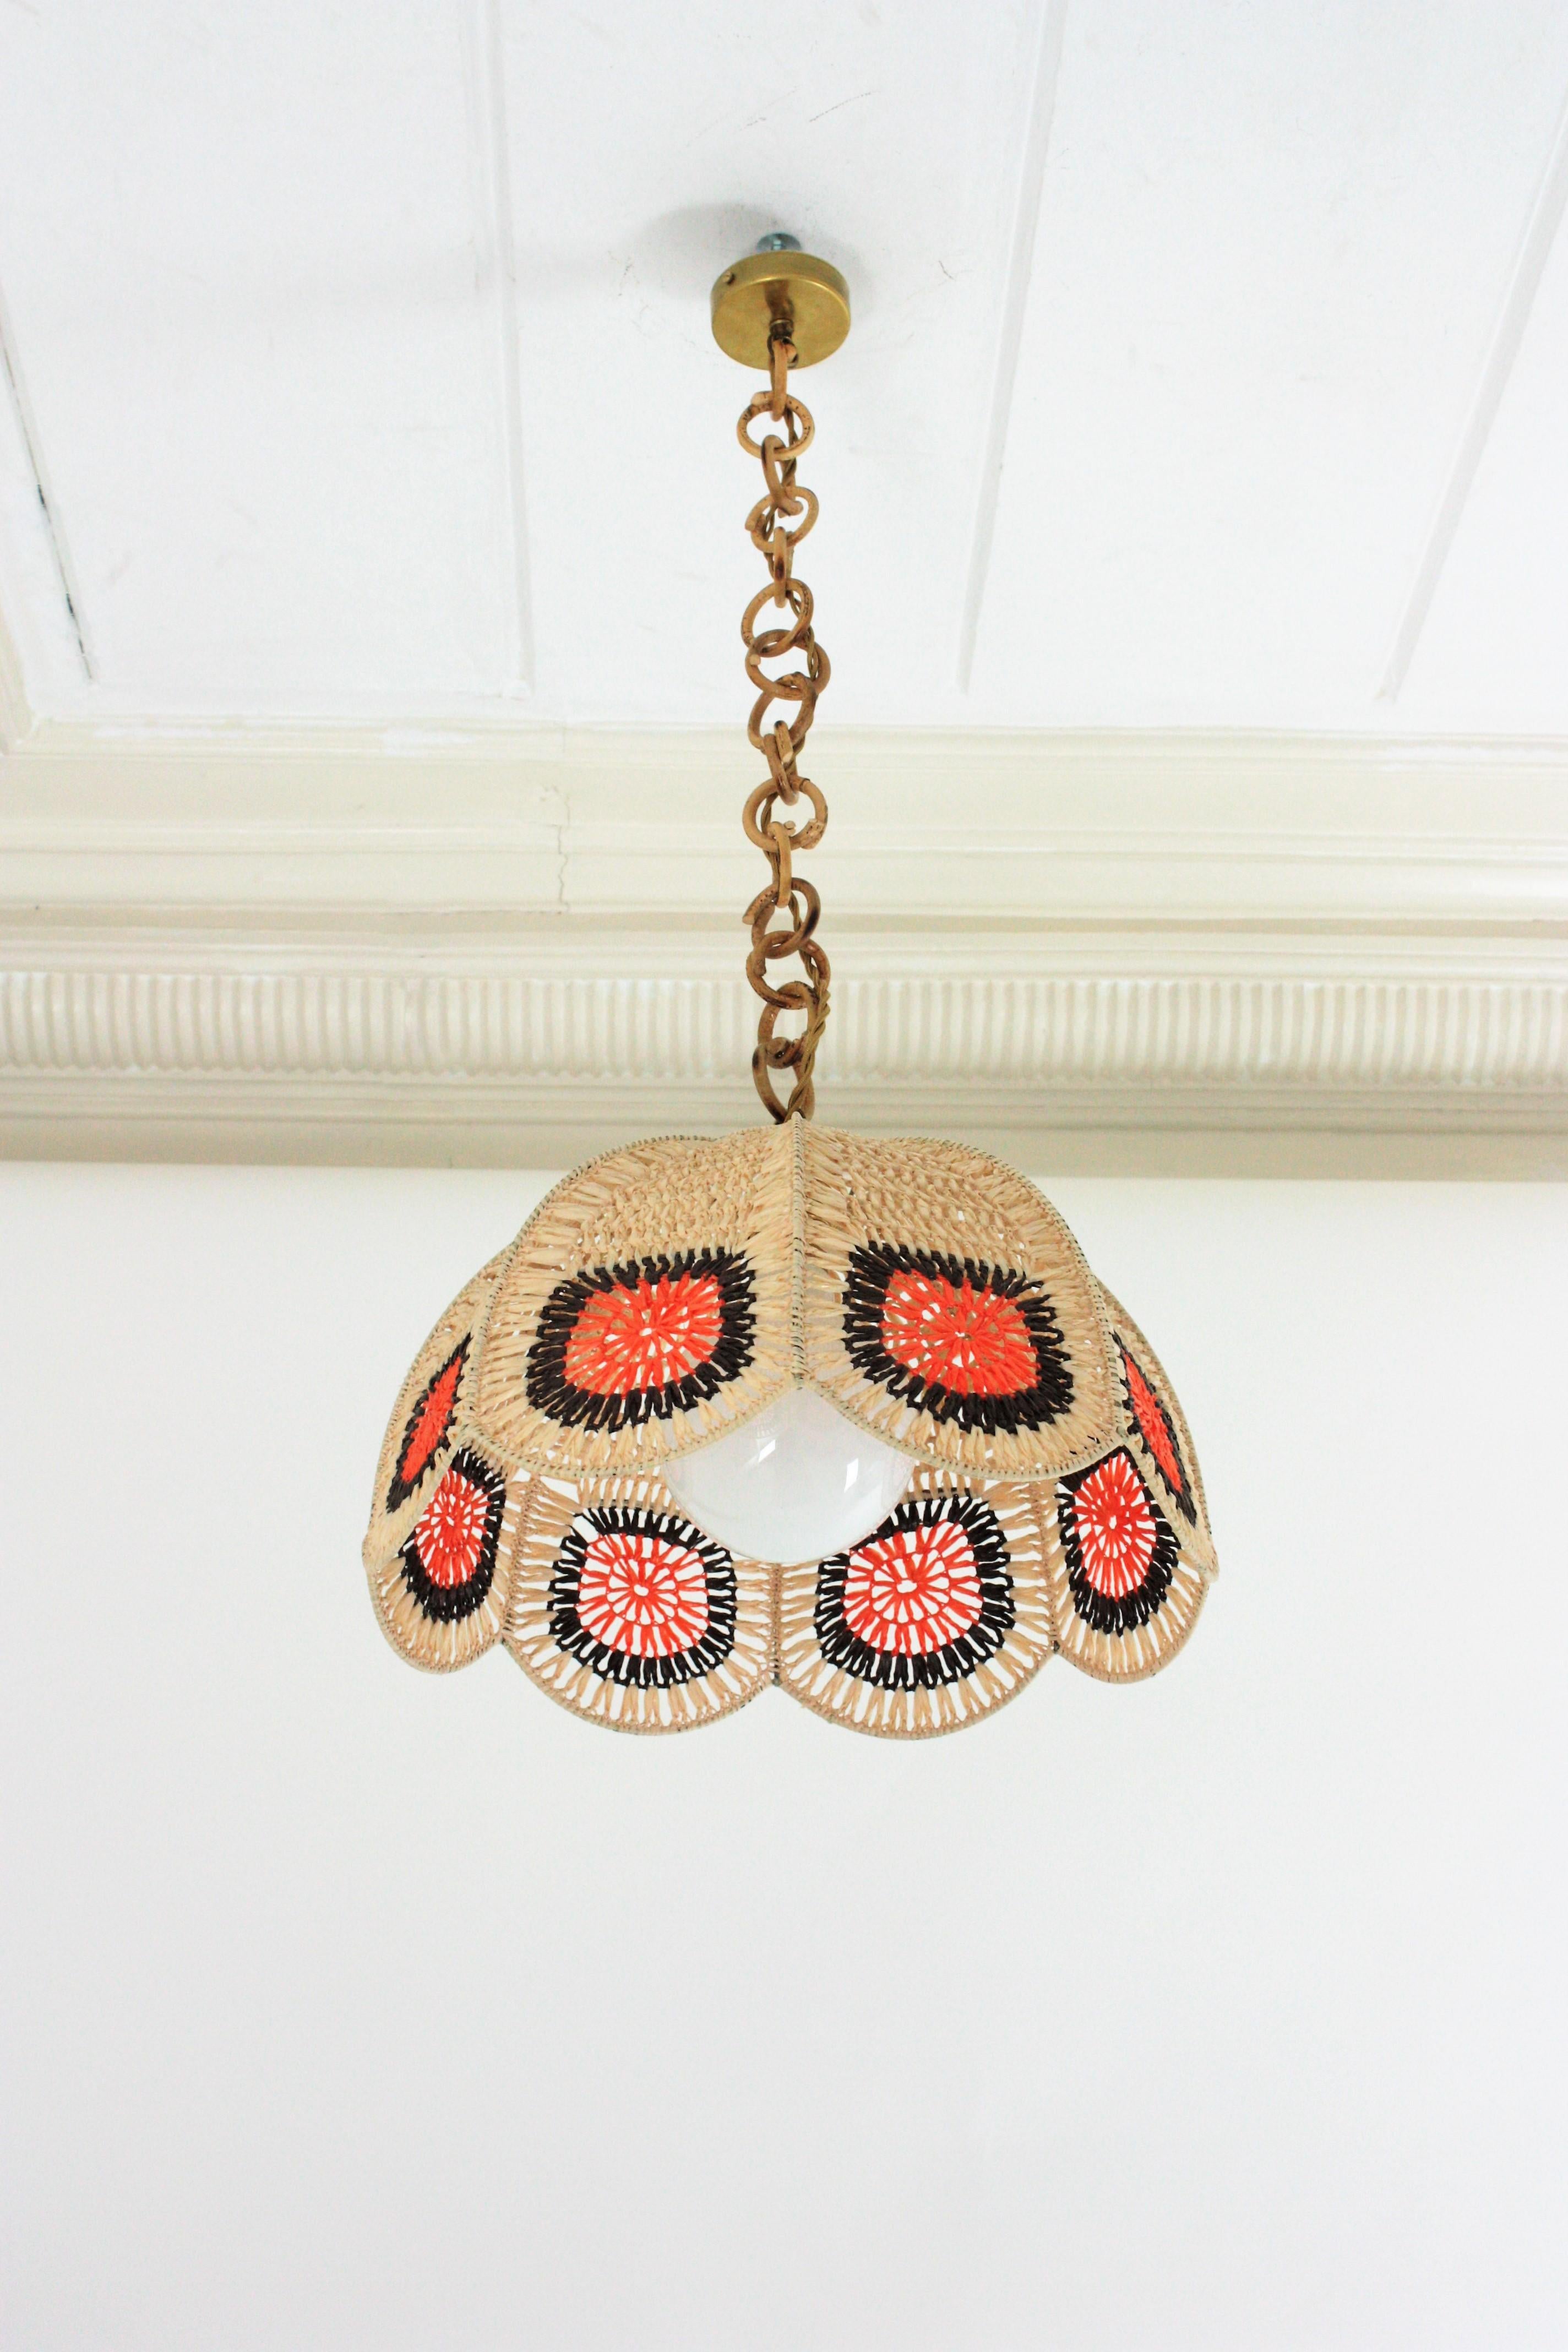 Spanish Modernist Pendant Lamp in Beige, Orange and Brown Macrame In Good Condition For Sale In Barcelona, ES